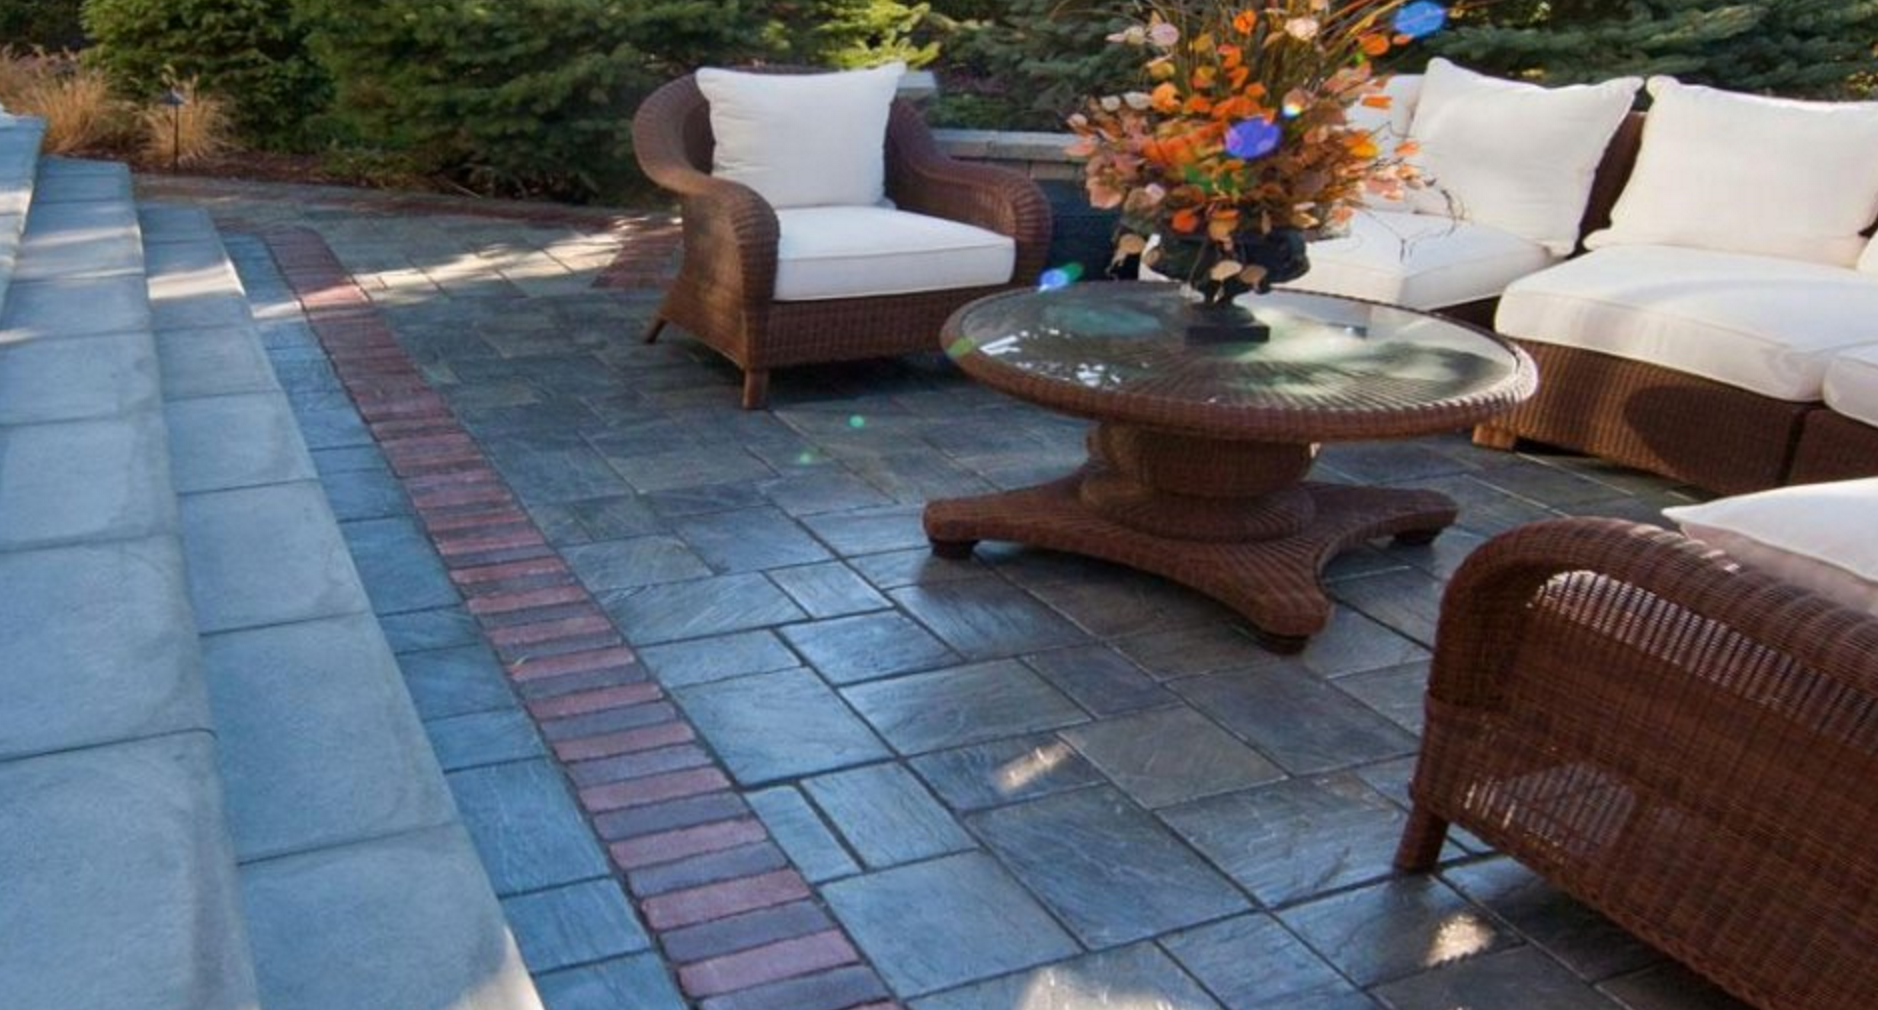 Unilock Pavers in NY: Adding Color to your outdoor living spaces 